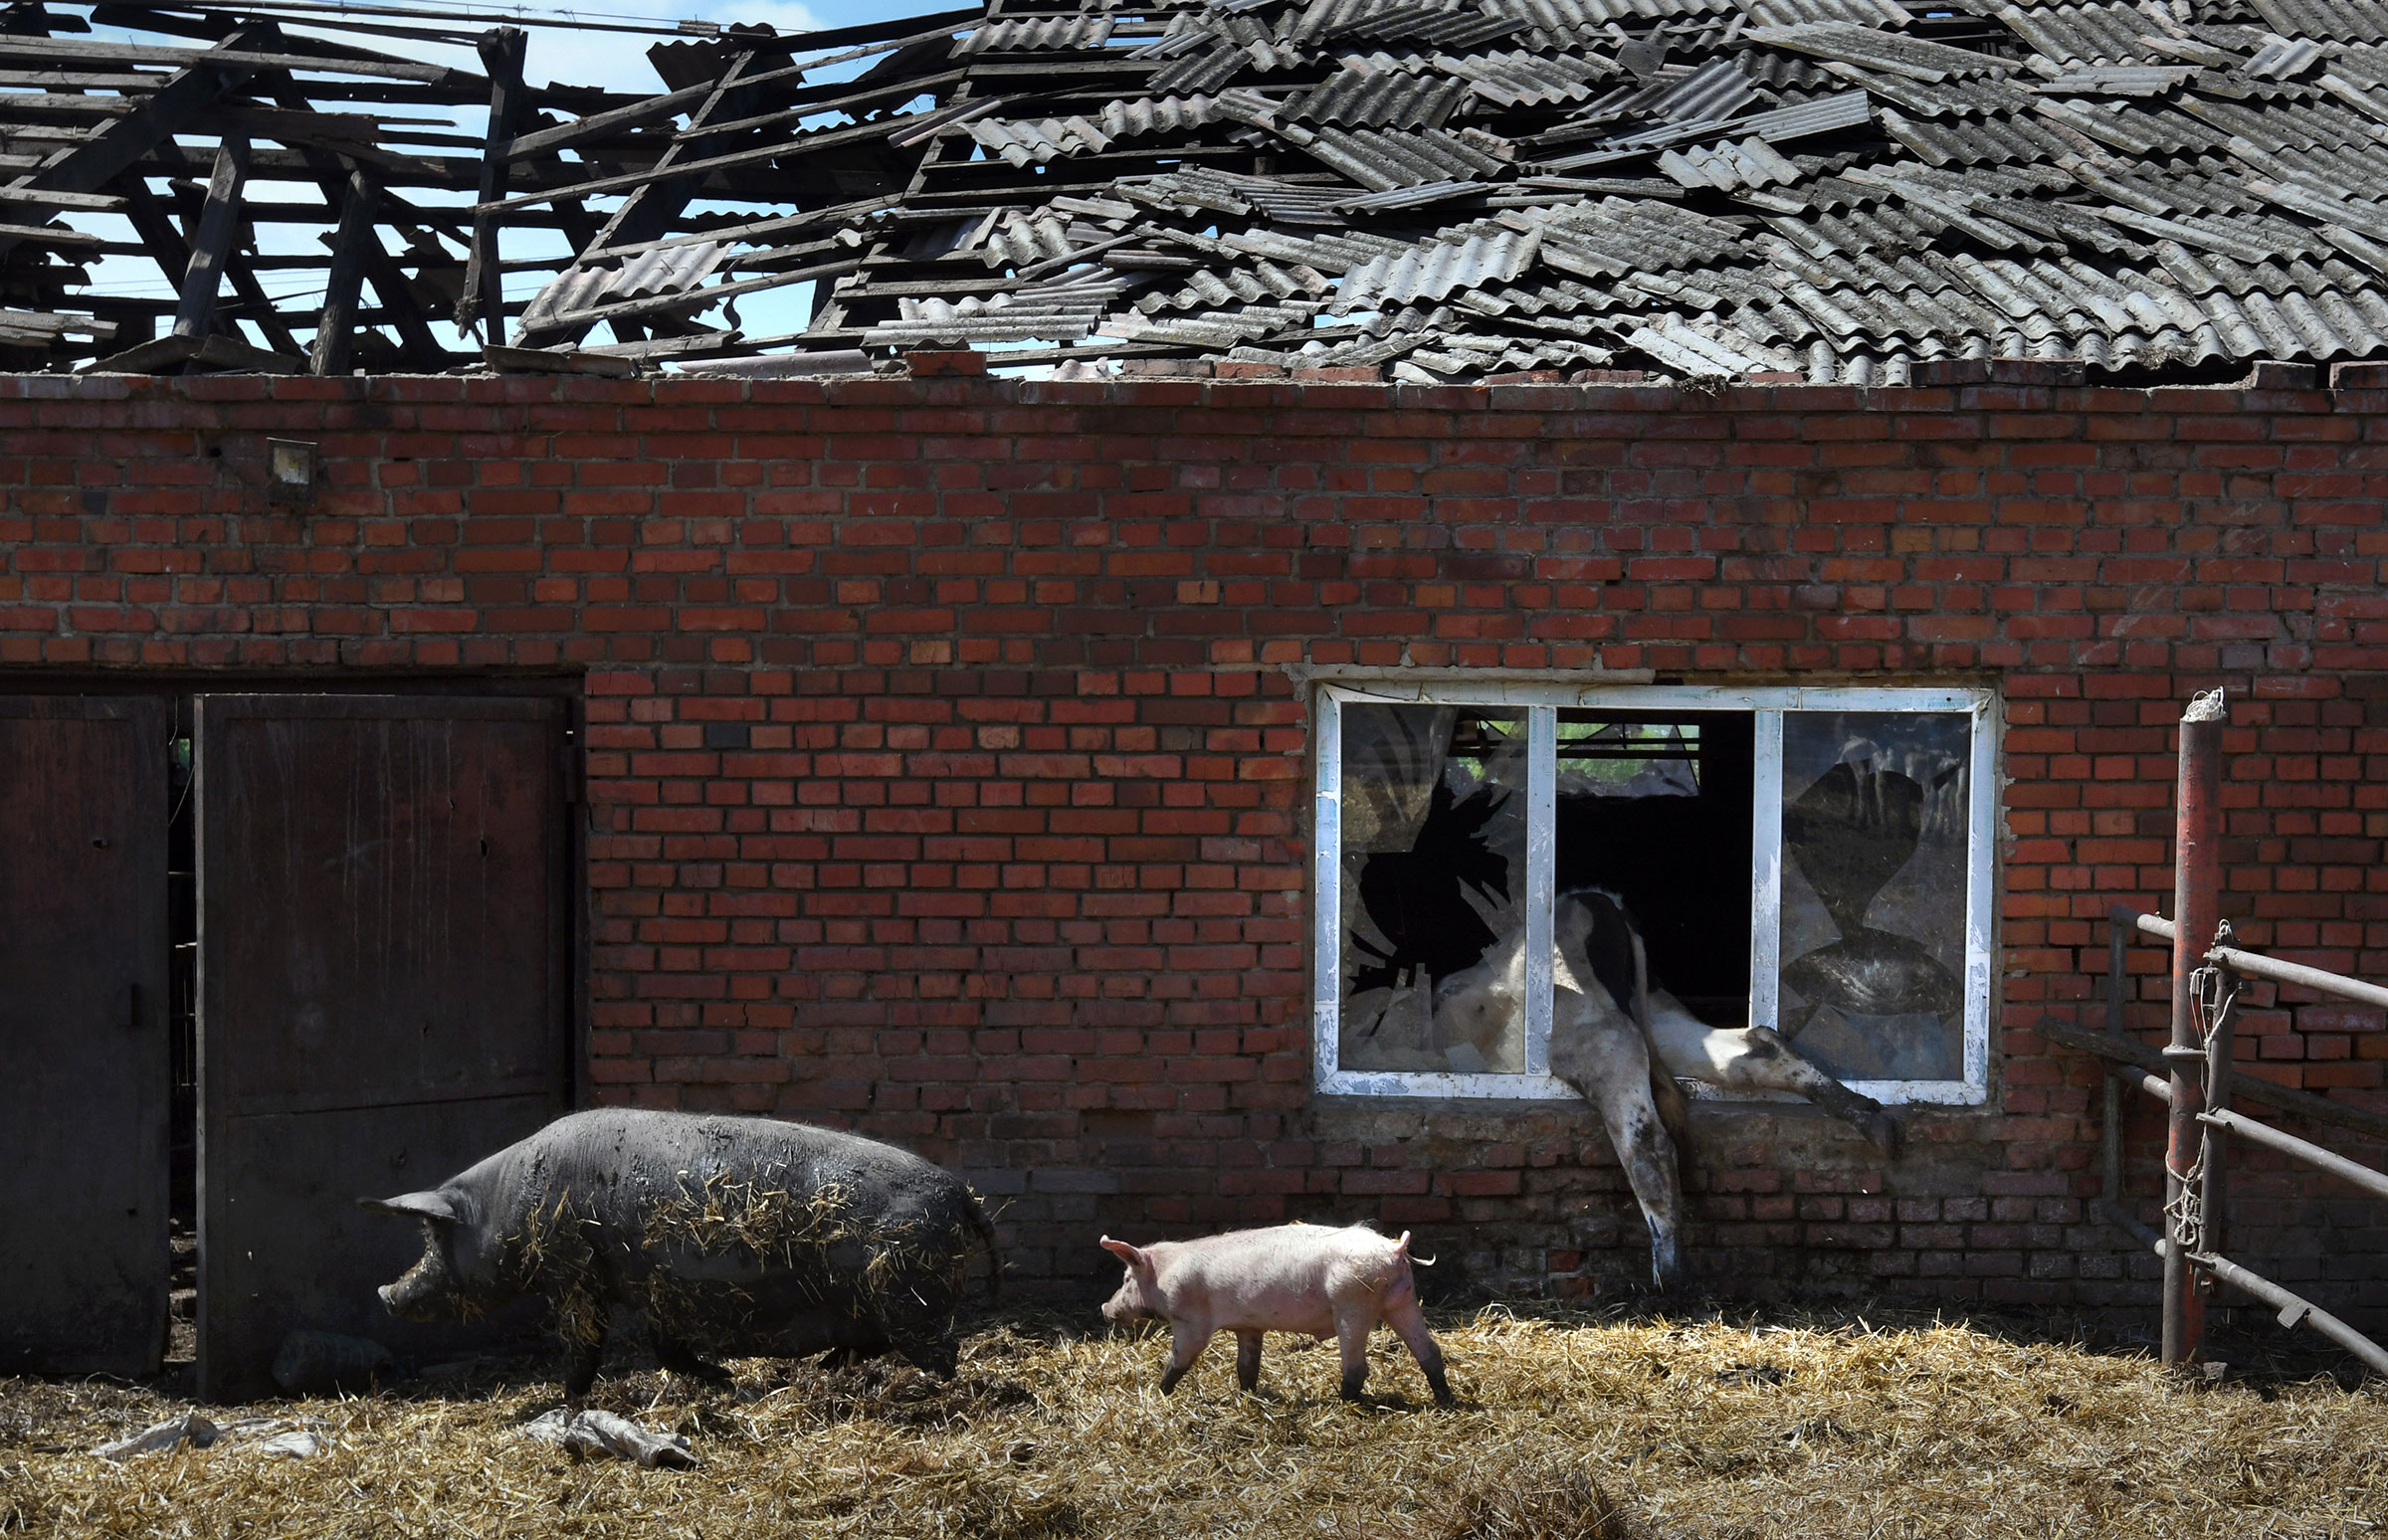 Farmer Oleksandr Novikov lost 80 cows and 30 pigs during two months of Russian artillery shelling and occupation in Vilkhivka, Ukraine on May 14.